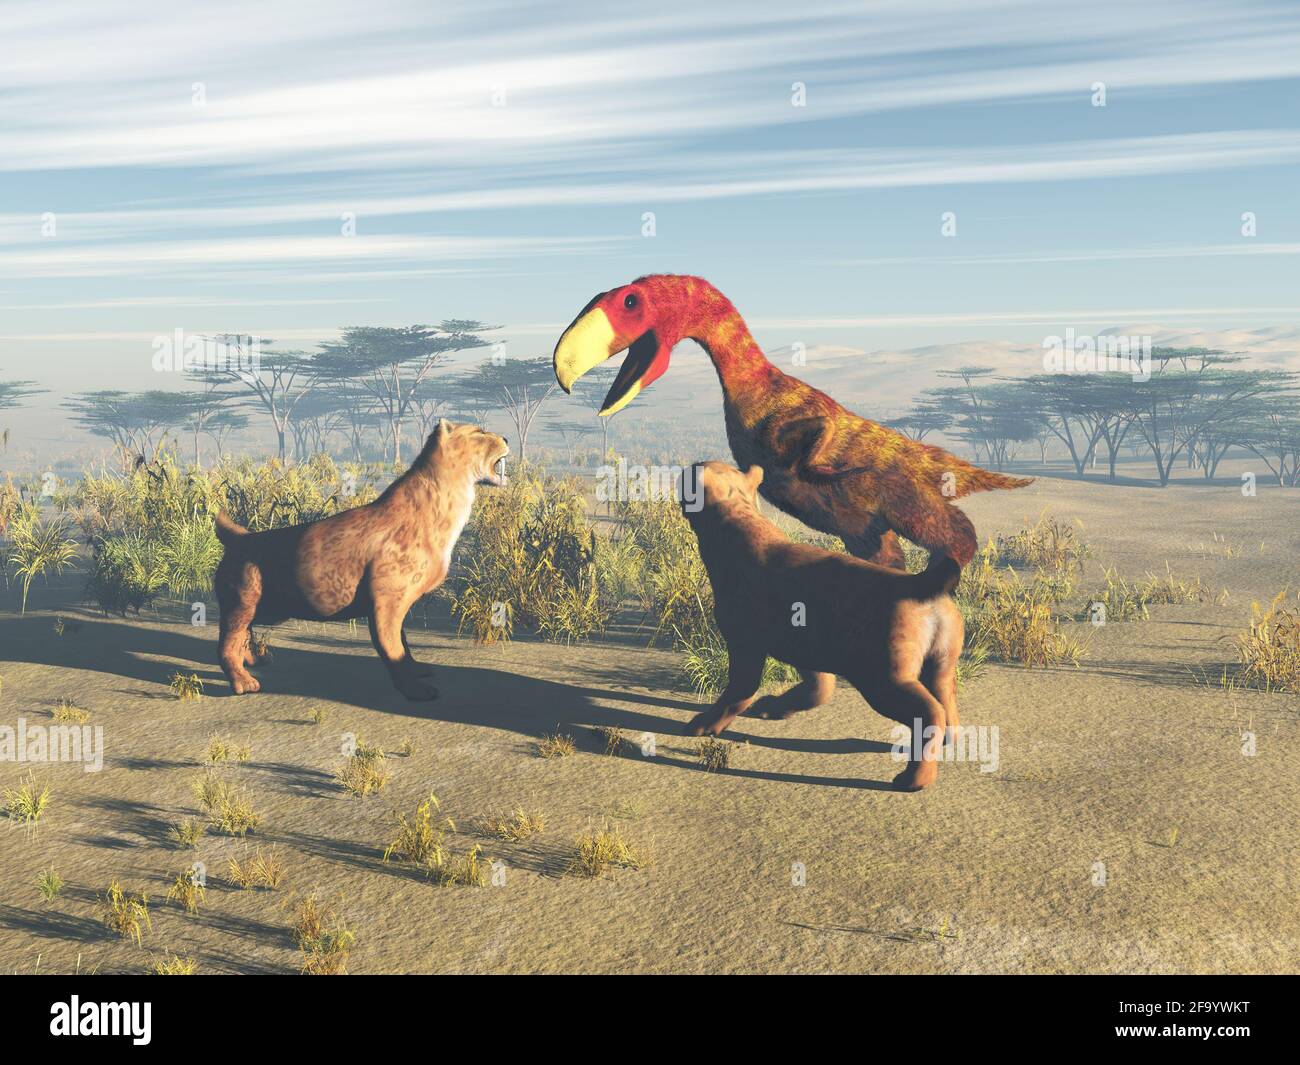 Two saber-toothed tigers facing a terror bird Stock Photo